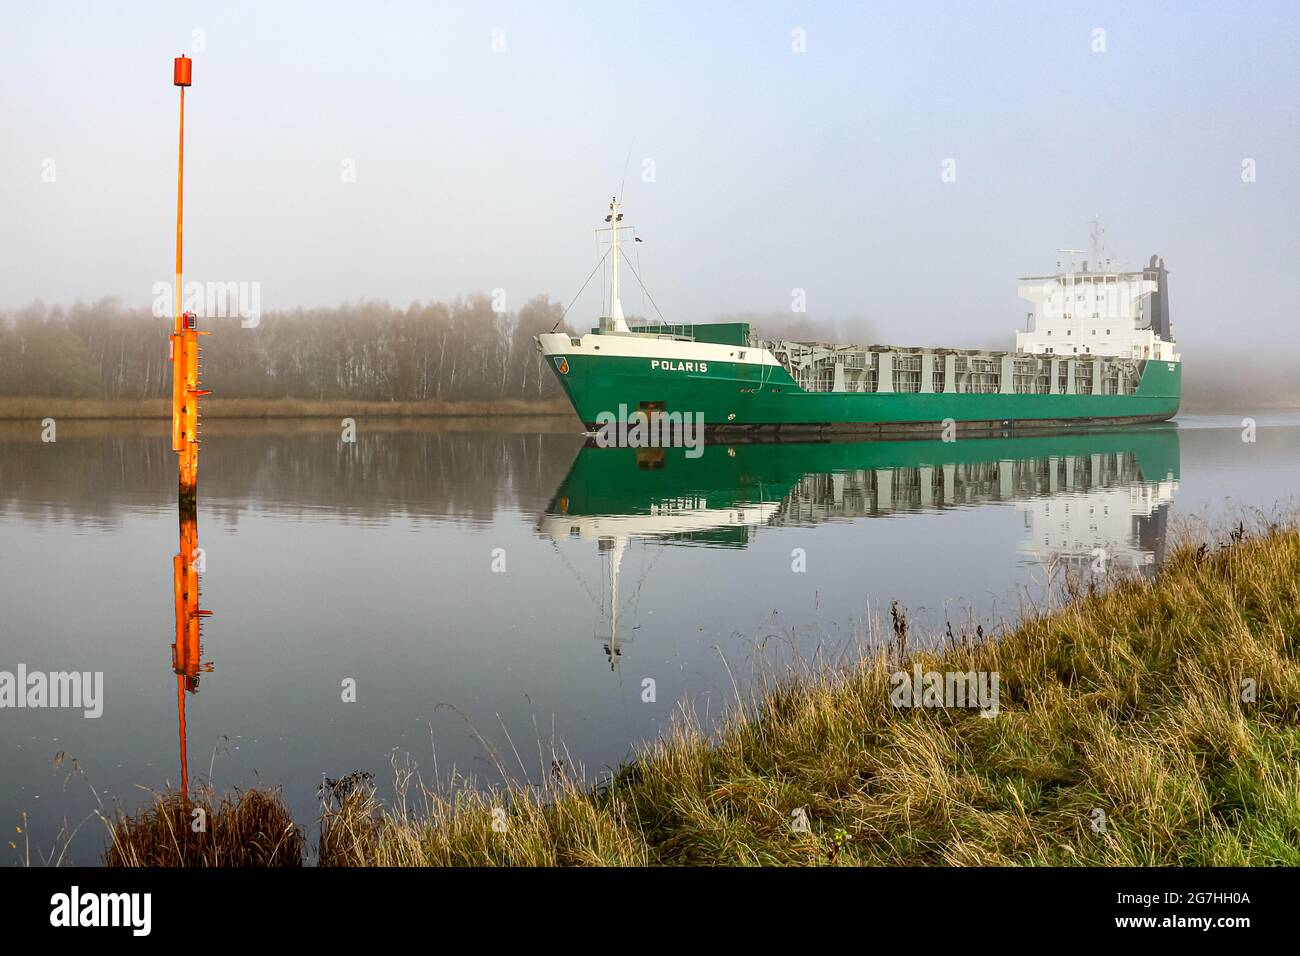 The Polaris is a Cargo Ro-ro ship for heavy transports. Here is on the Trave in Lübeck, Germany. Stock Photo